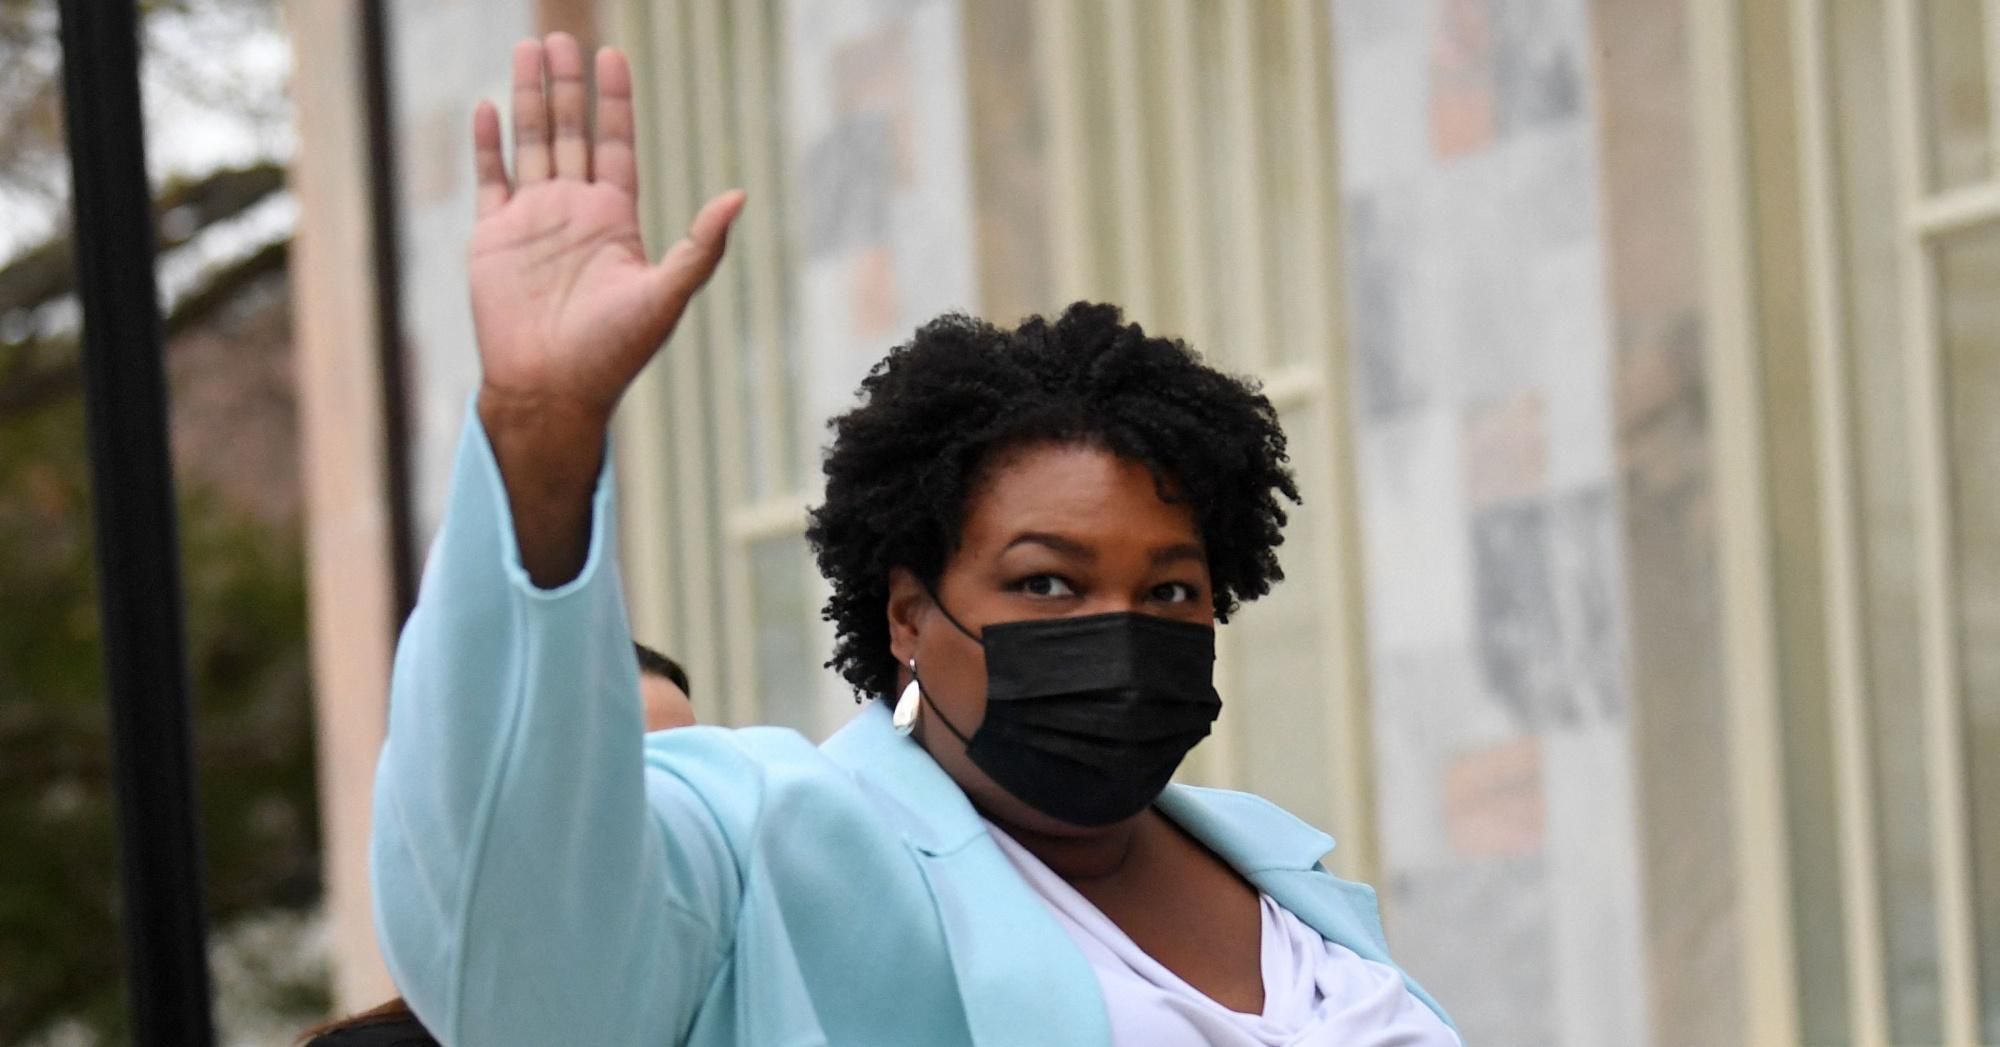 Voting rights activist Stacey Abrams arrives to meet with U.S. President Joe Biden at Emory University in Atlanta, Georgia on March 19, 2021. (Photo: Eric Baradat/AFP via Getty Images)